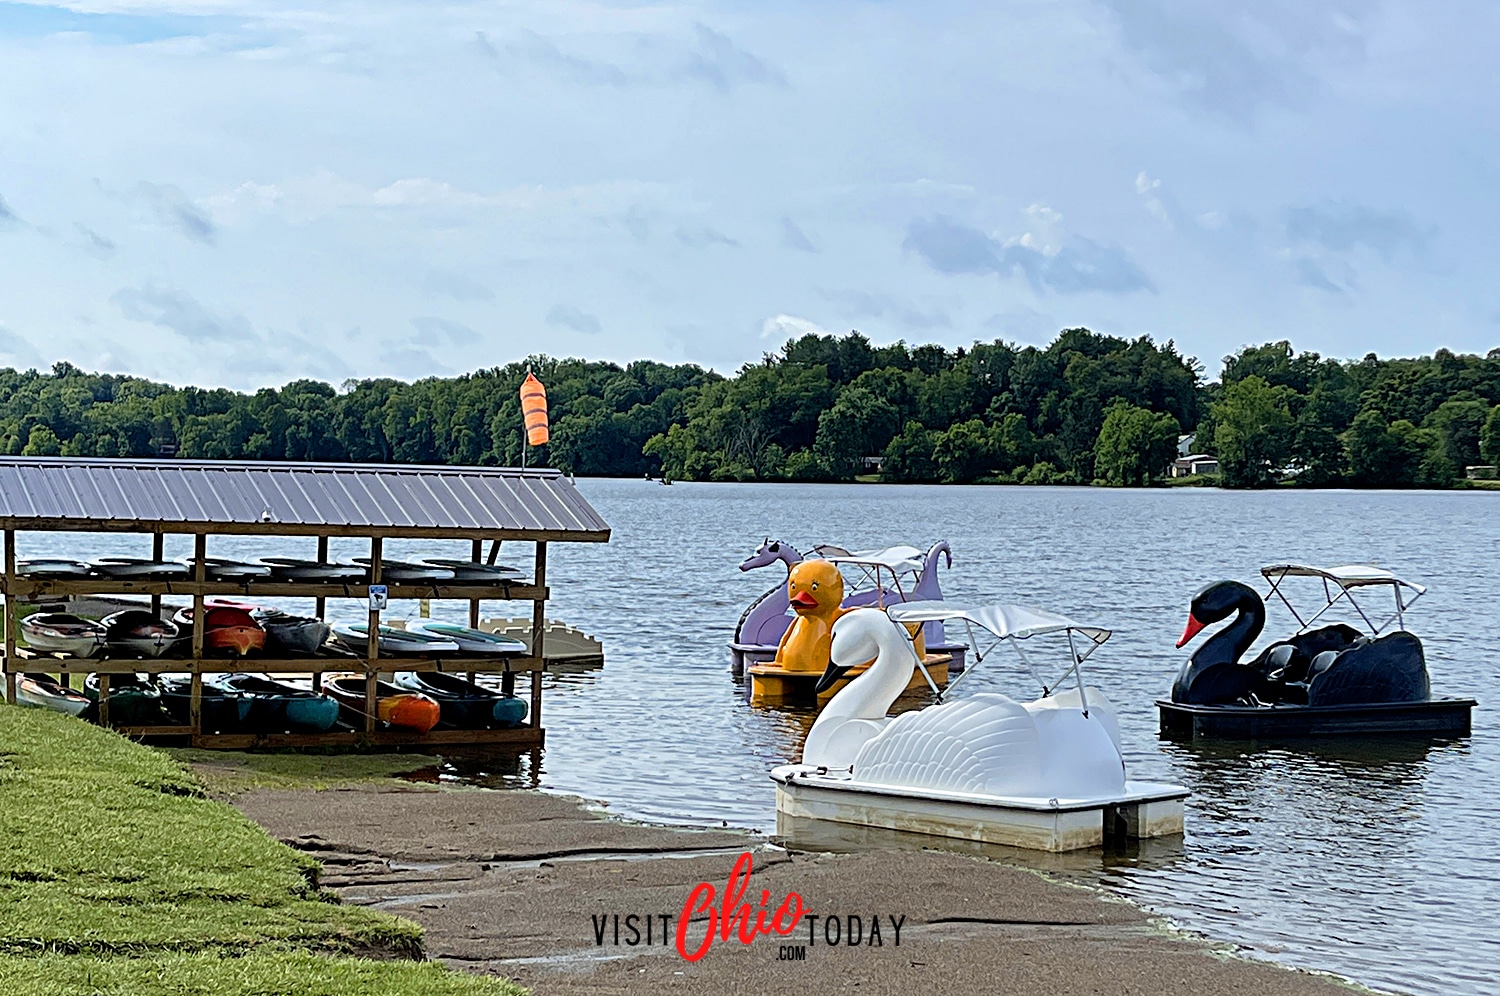 horizontal photo of the pedal boats on the water and other watercraft on the marina. Photo credit: Cindy Gordon of VisitOhioToday.com